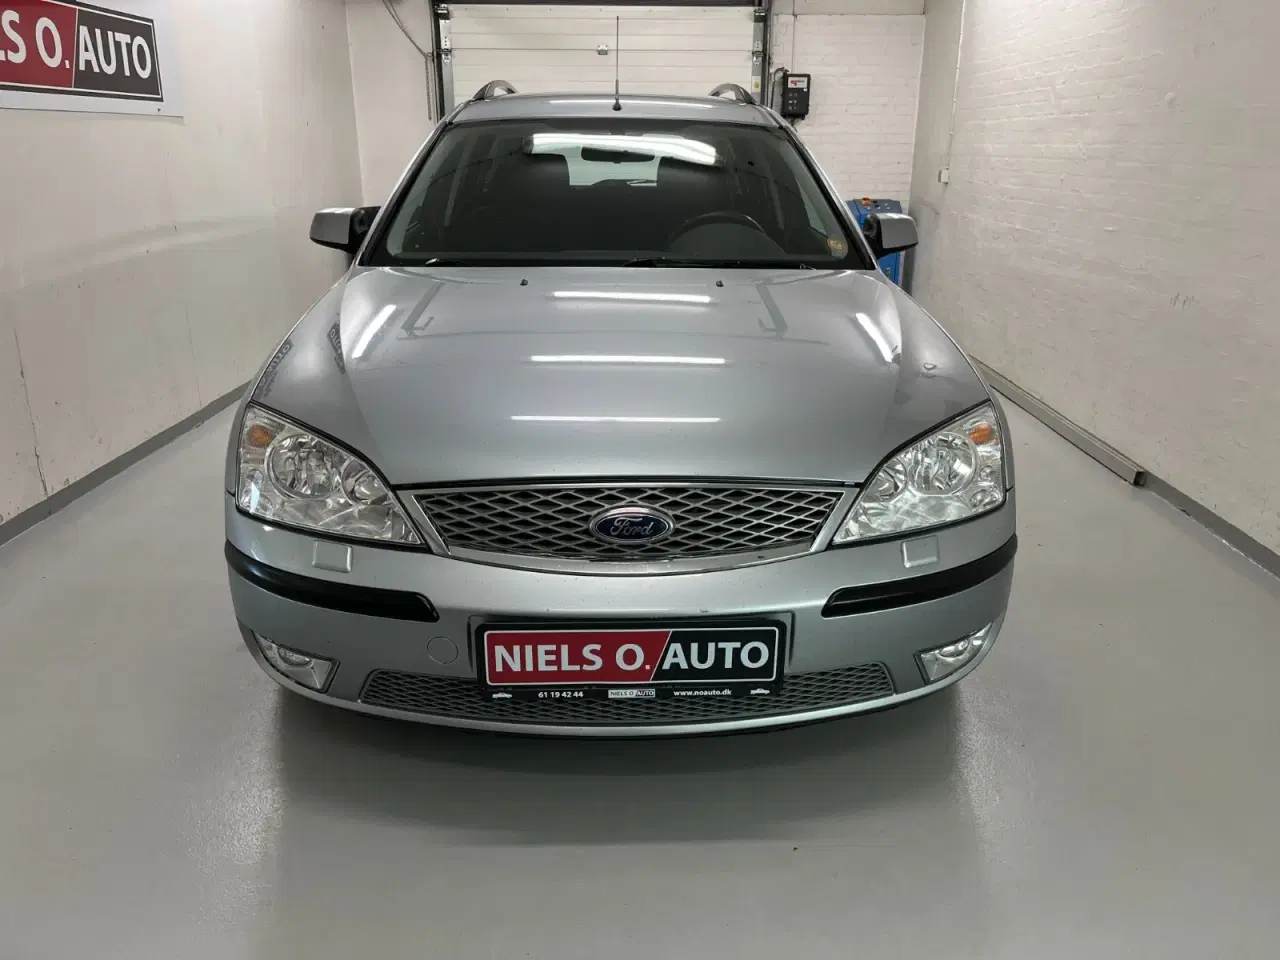 Billede 15 - Ford Mondeo 2,0 145 Trend stc.